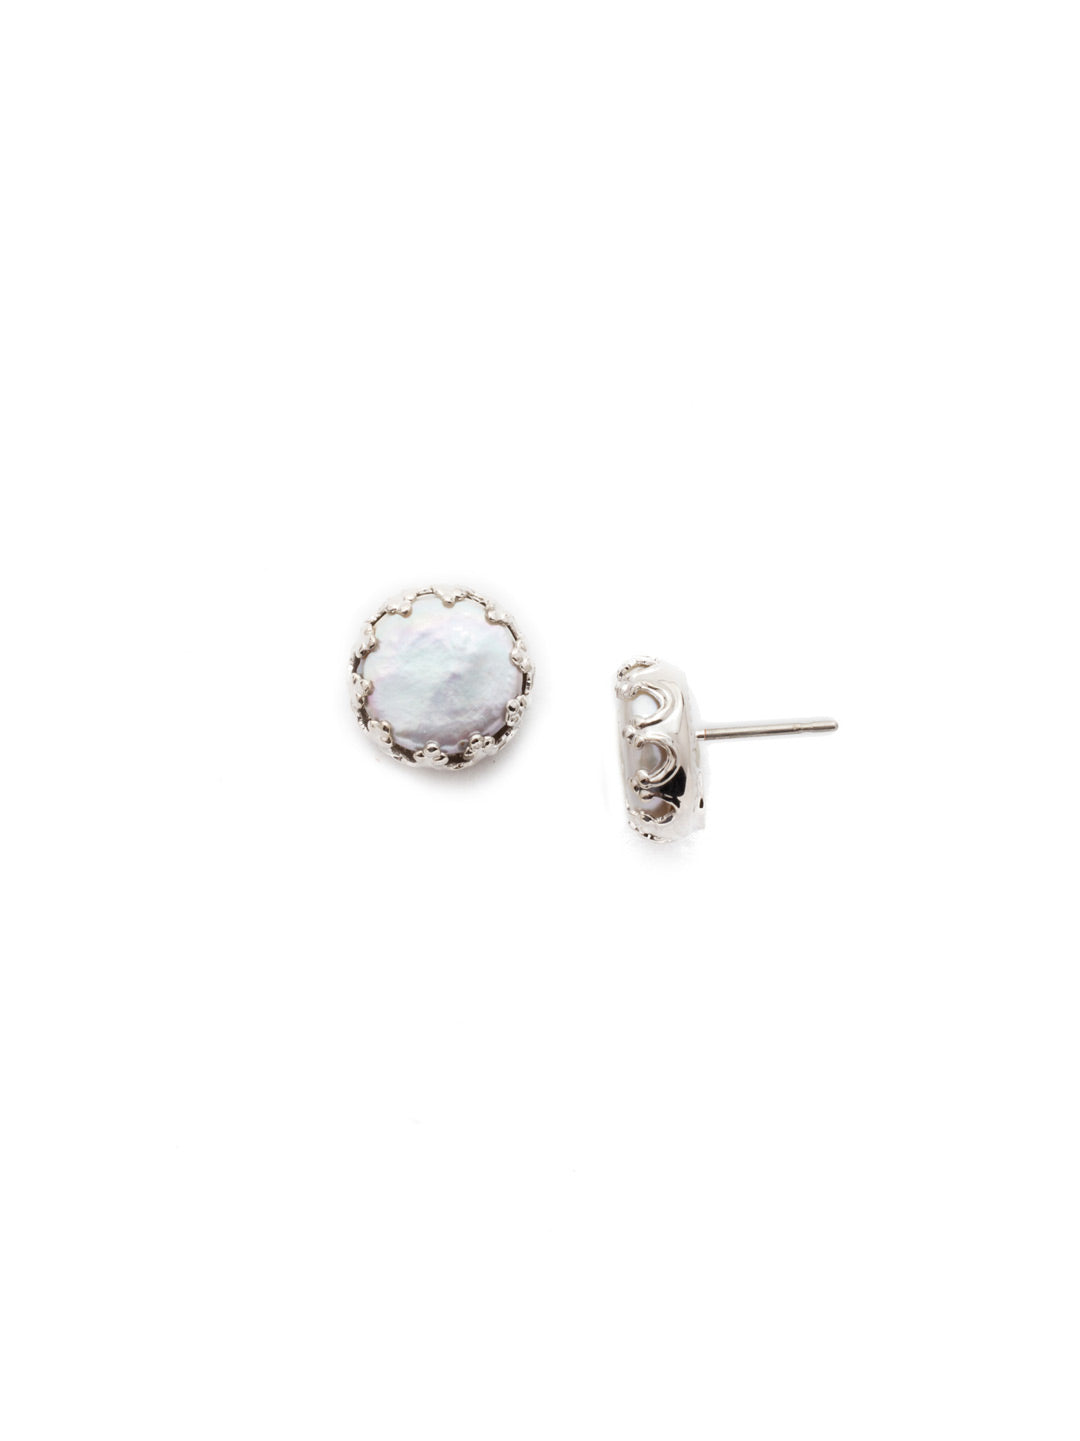 Isabella Stud Earrings - EEC15RHPLP - Cute as a button! These post earrings feature a circular button pearl inside a decorative metal setting. From Sorrelli's Polished Pearl collection in our Palladium Silver-tone finish.